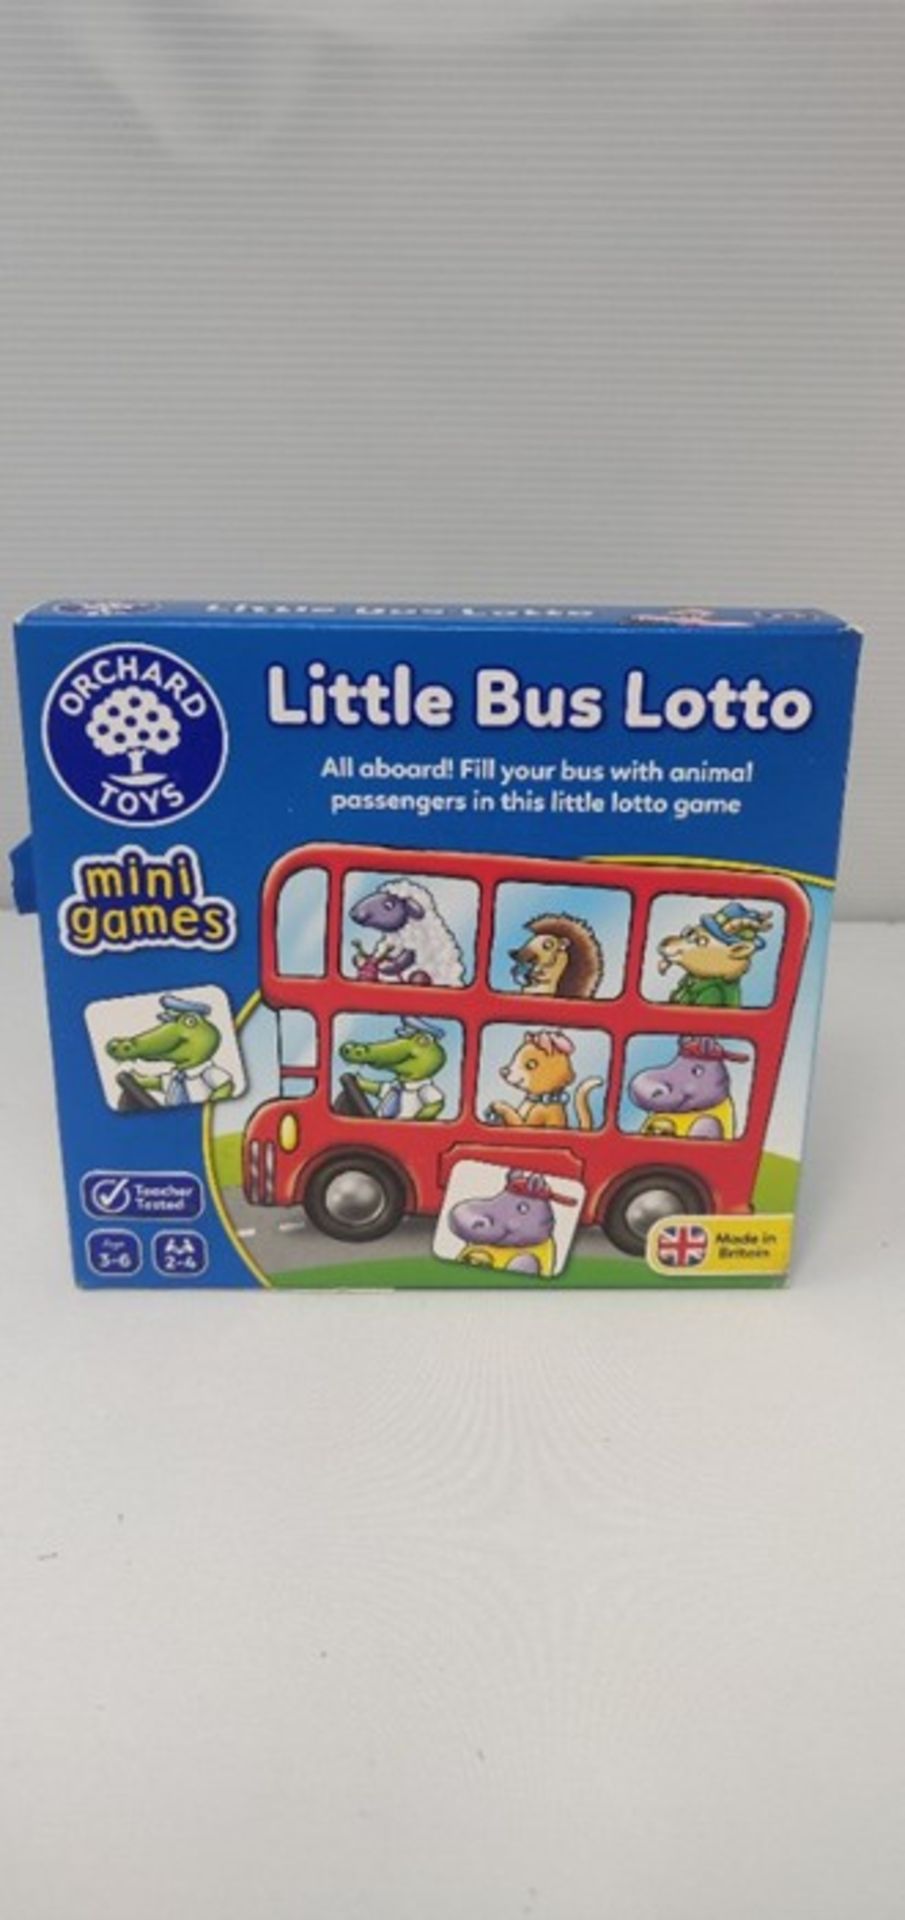 Orchard Toys Little Bus Lotto Mini Game - Image 2 of 3